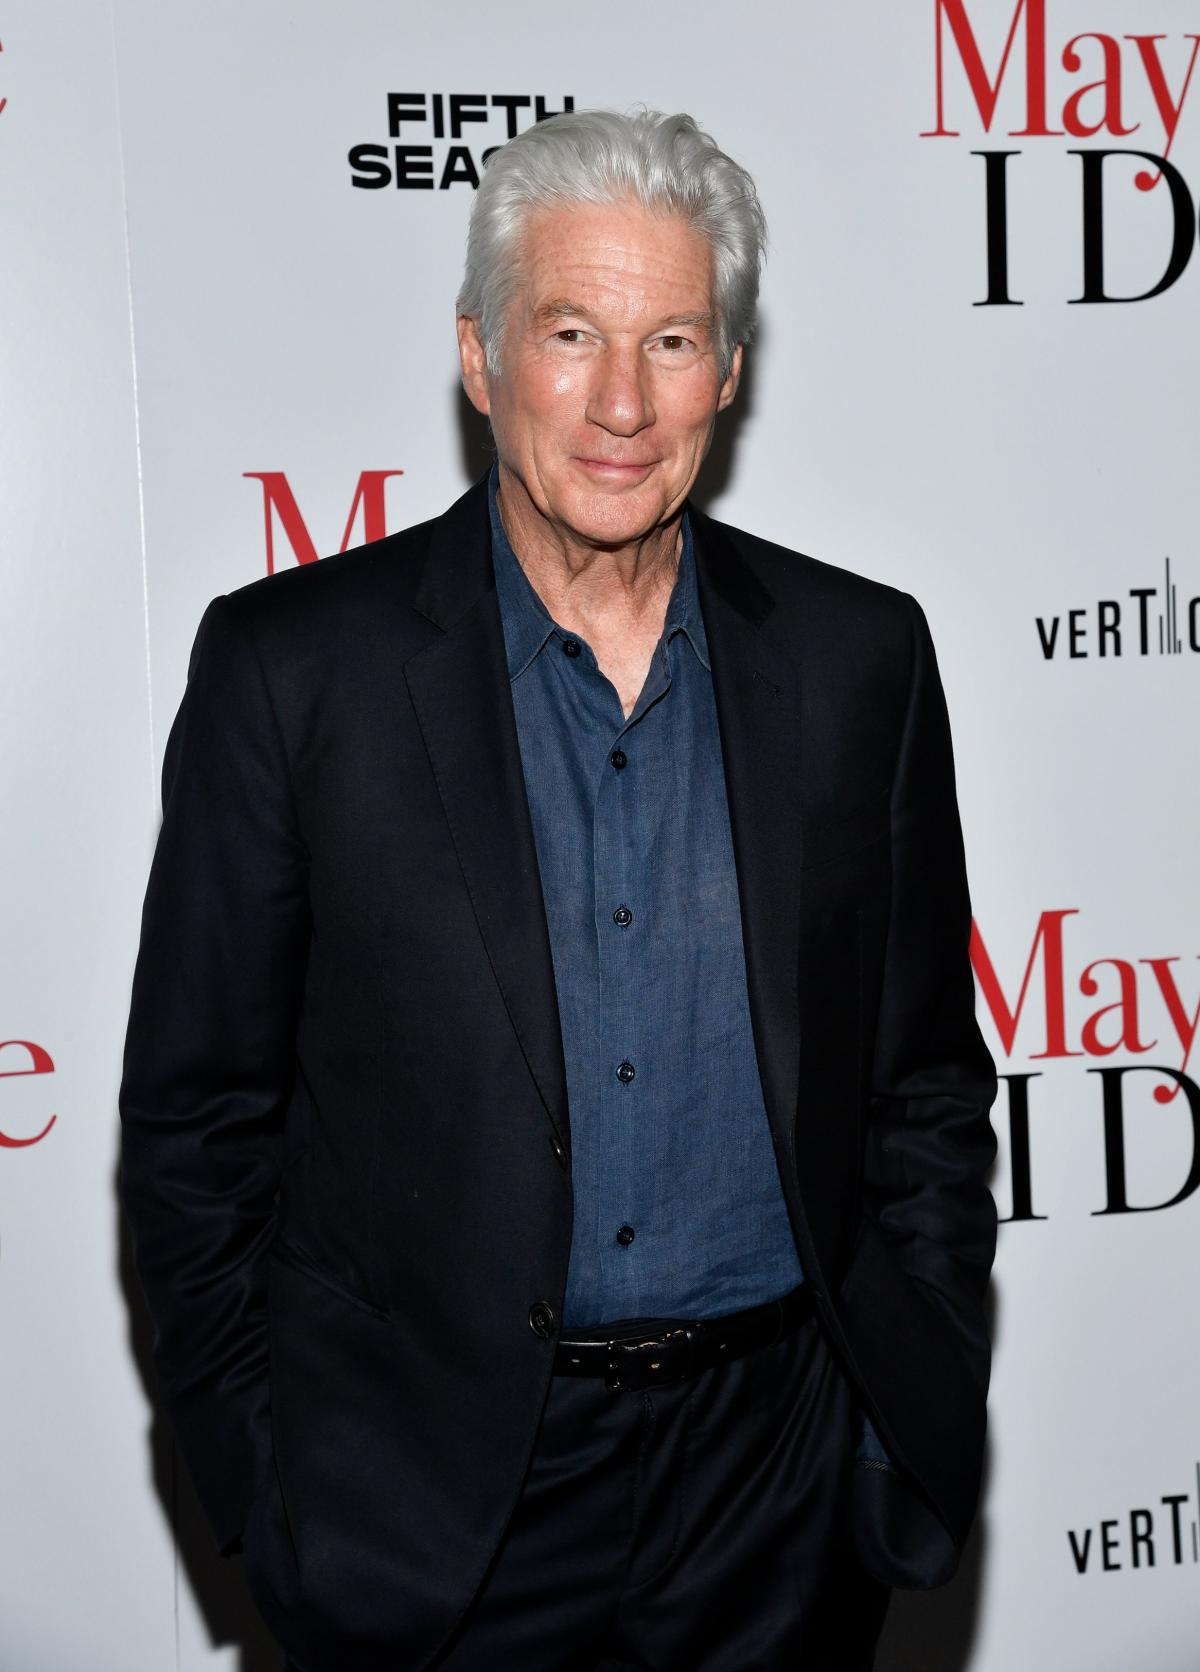 What happened to Richard Gere? Update on actor's health and recovery amid  illness - Local News Today